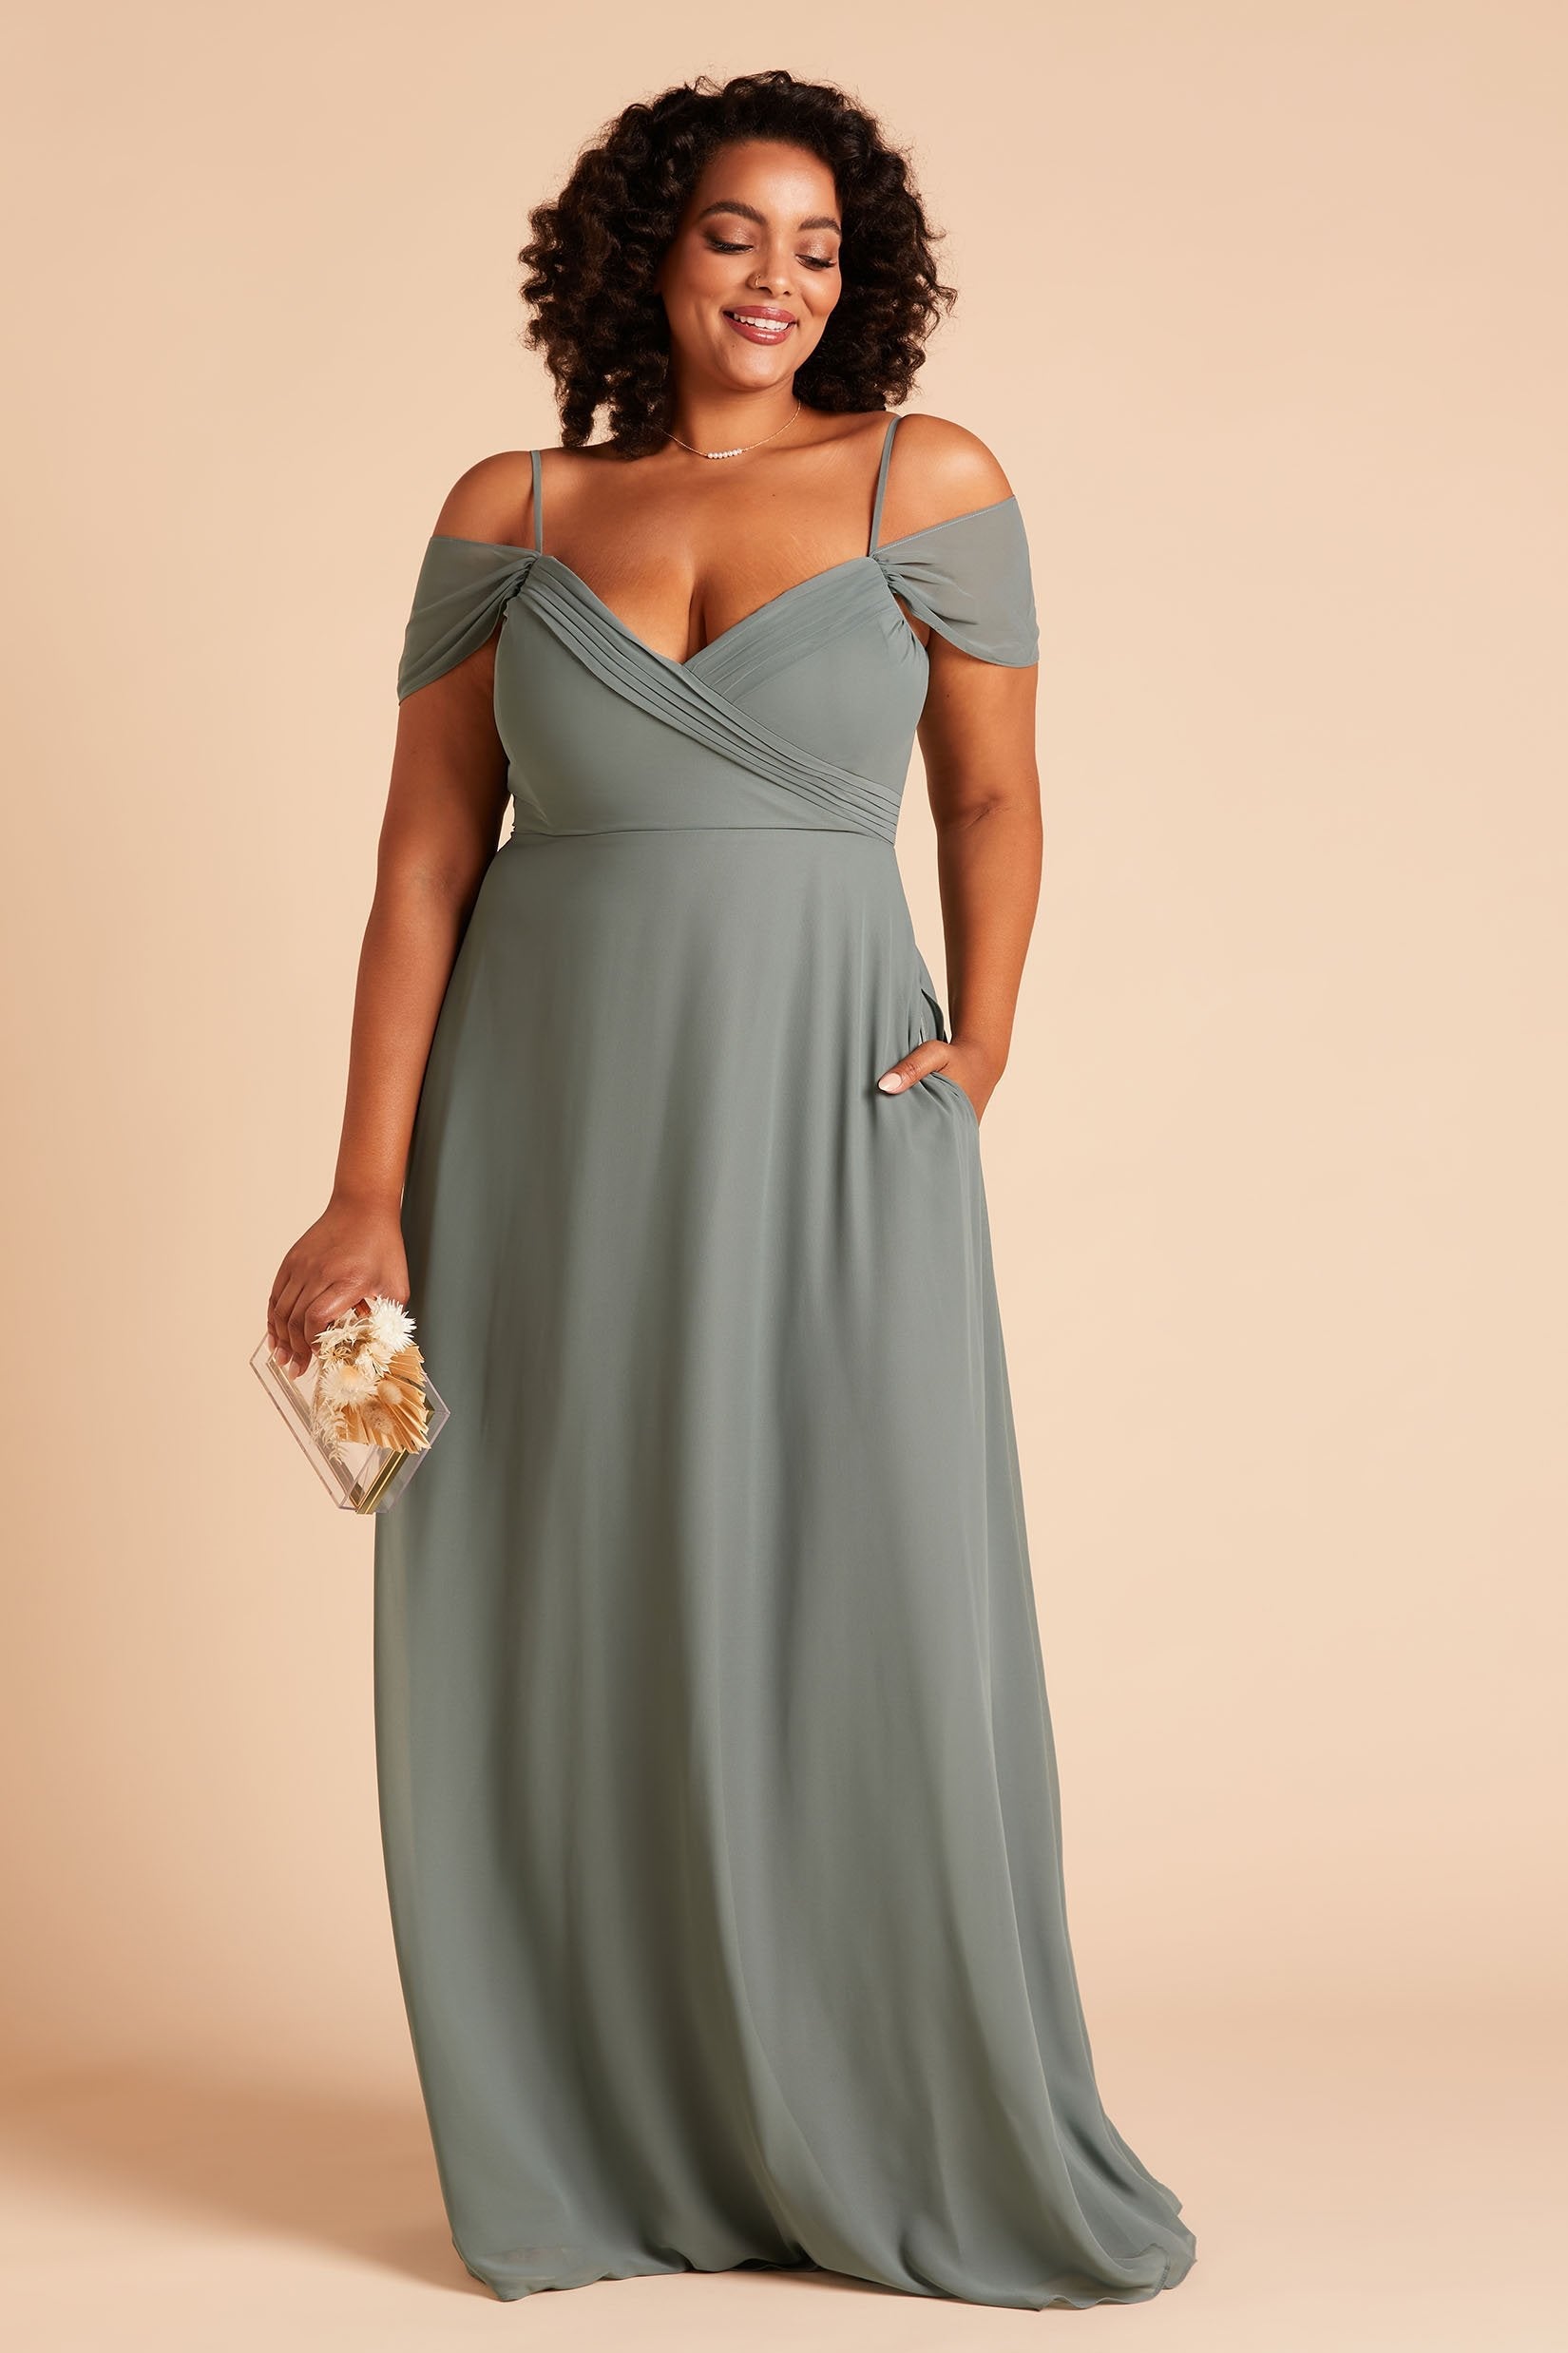 Spence convertible plus size bridesmaid dress in sea glass green chiffon by Birdy Grey, front view with hand in pocket